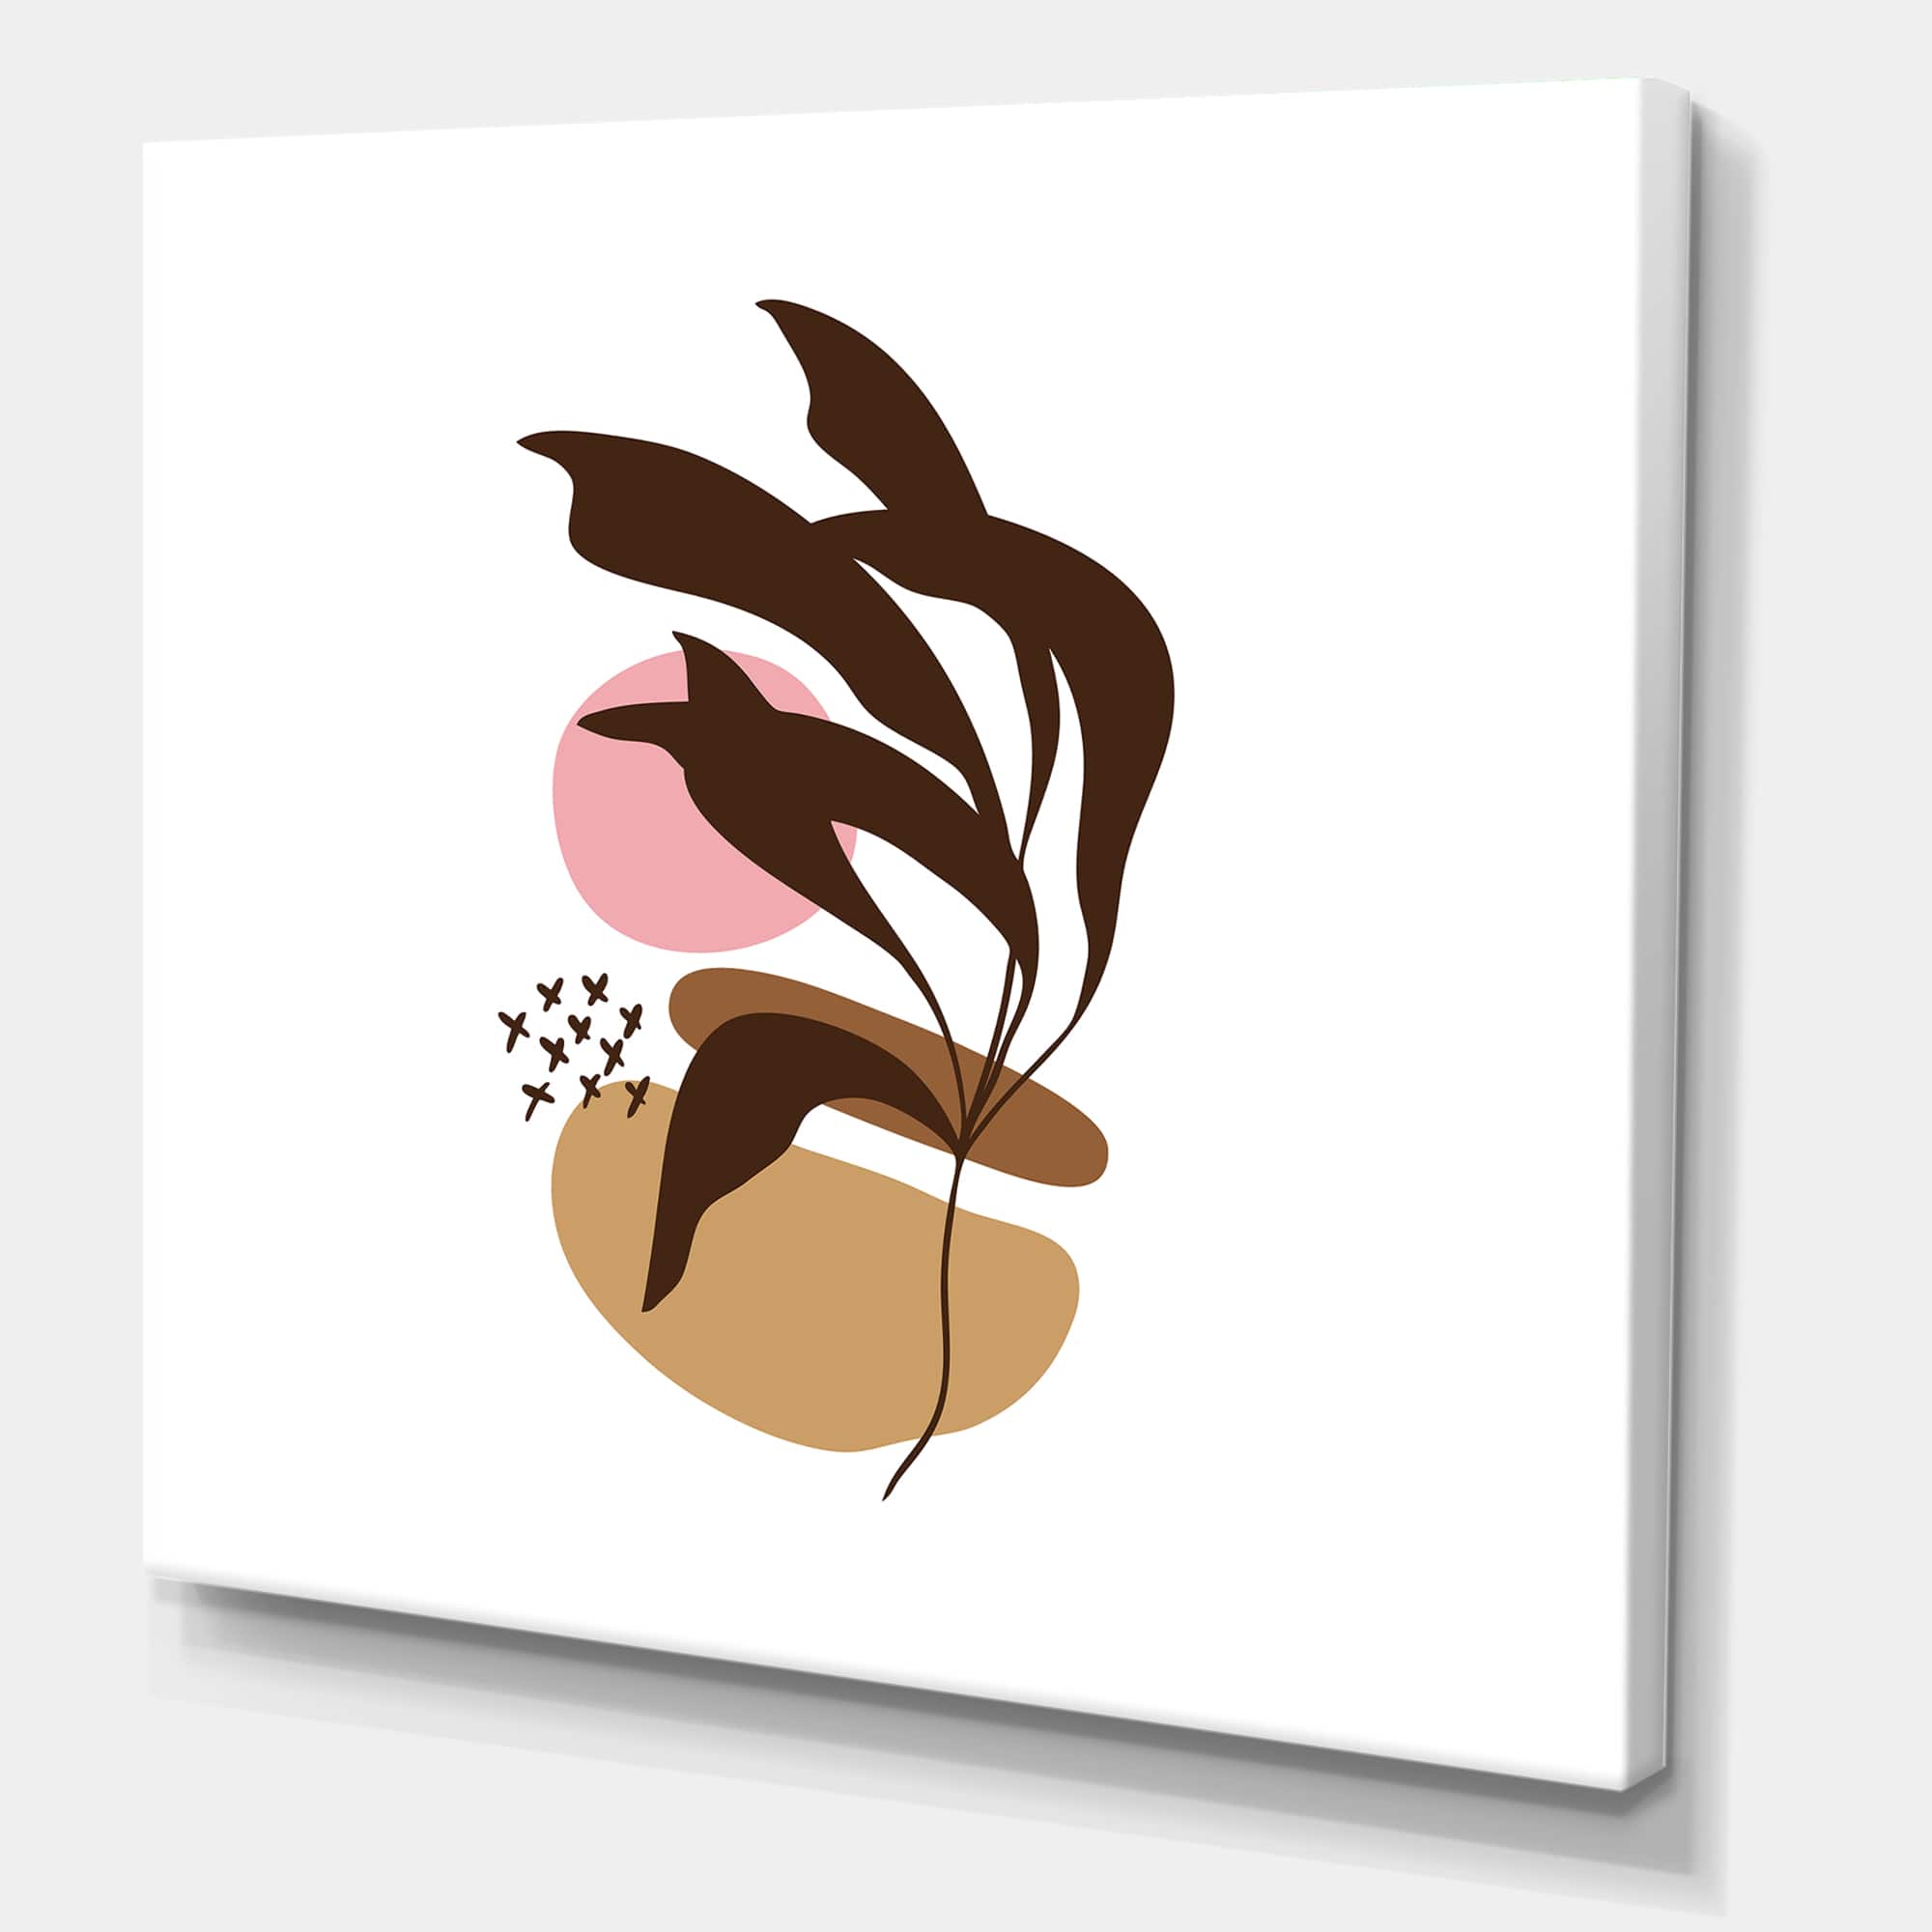 Designart - Elementary Shapes With Abstract Plants - Modern Canvas Wall Art Print